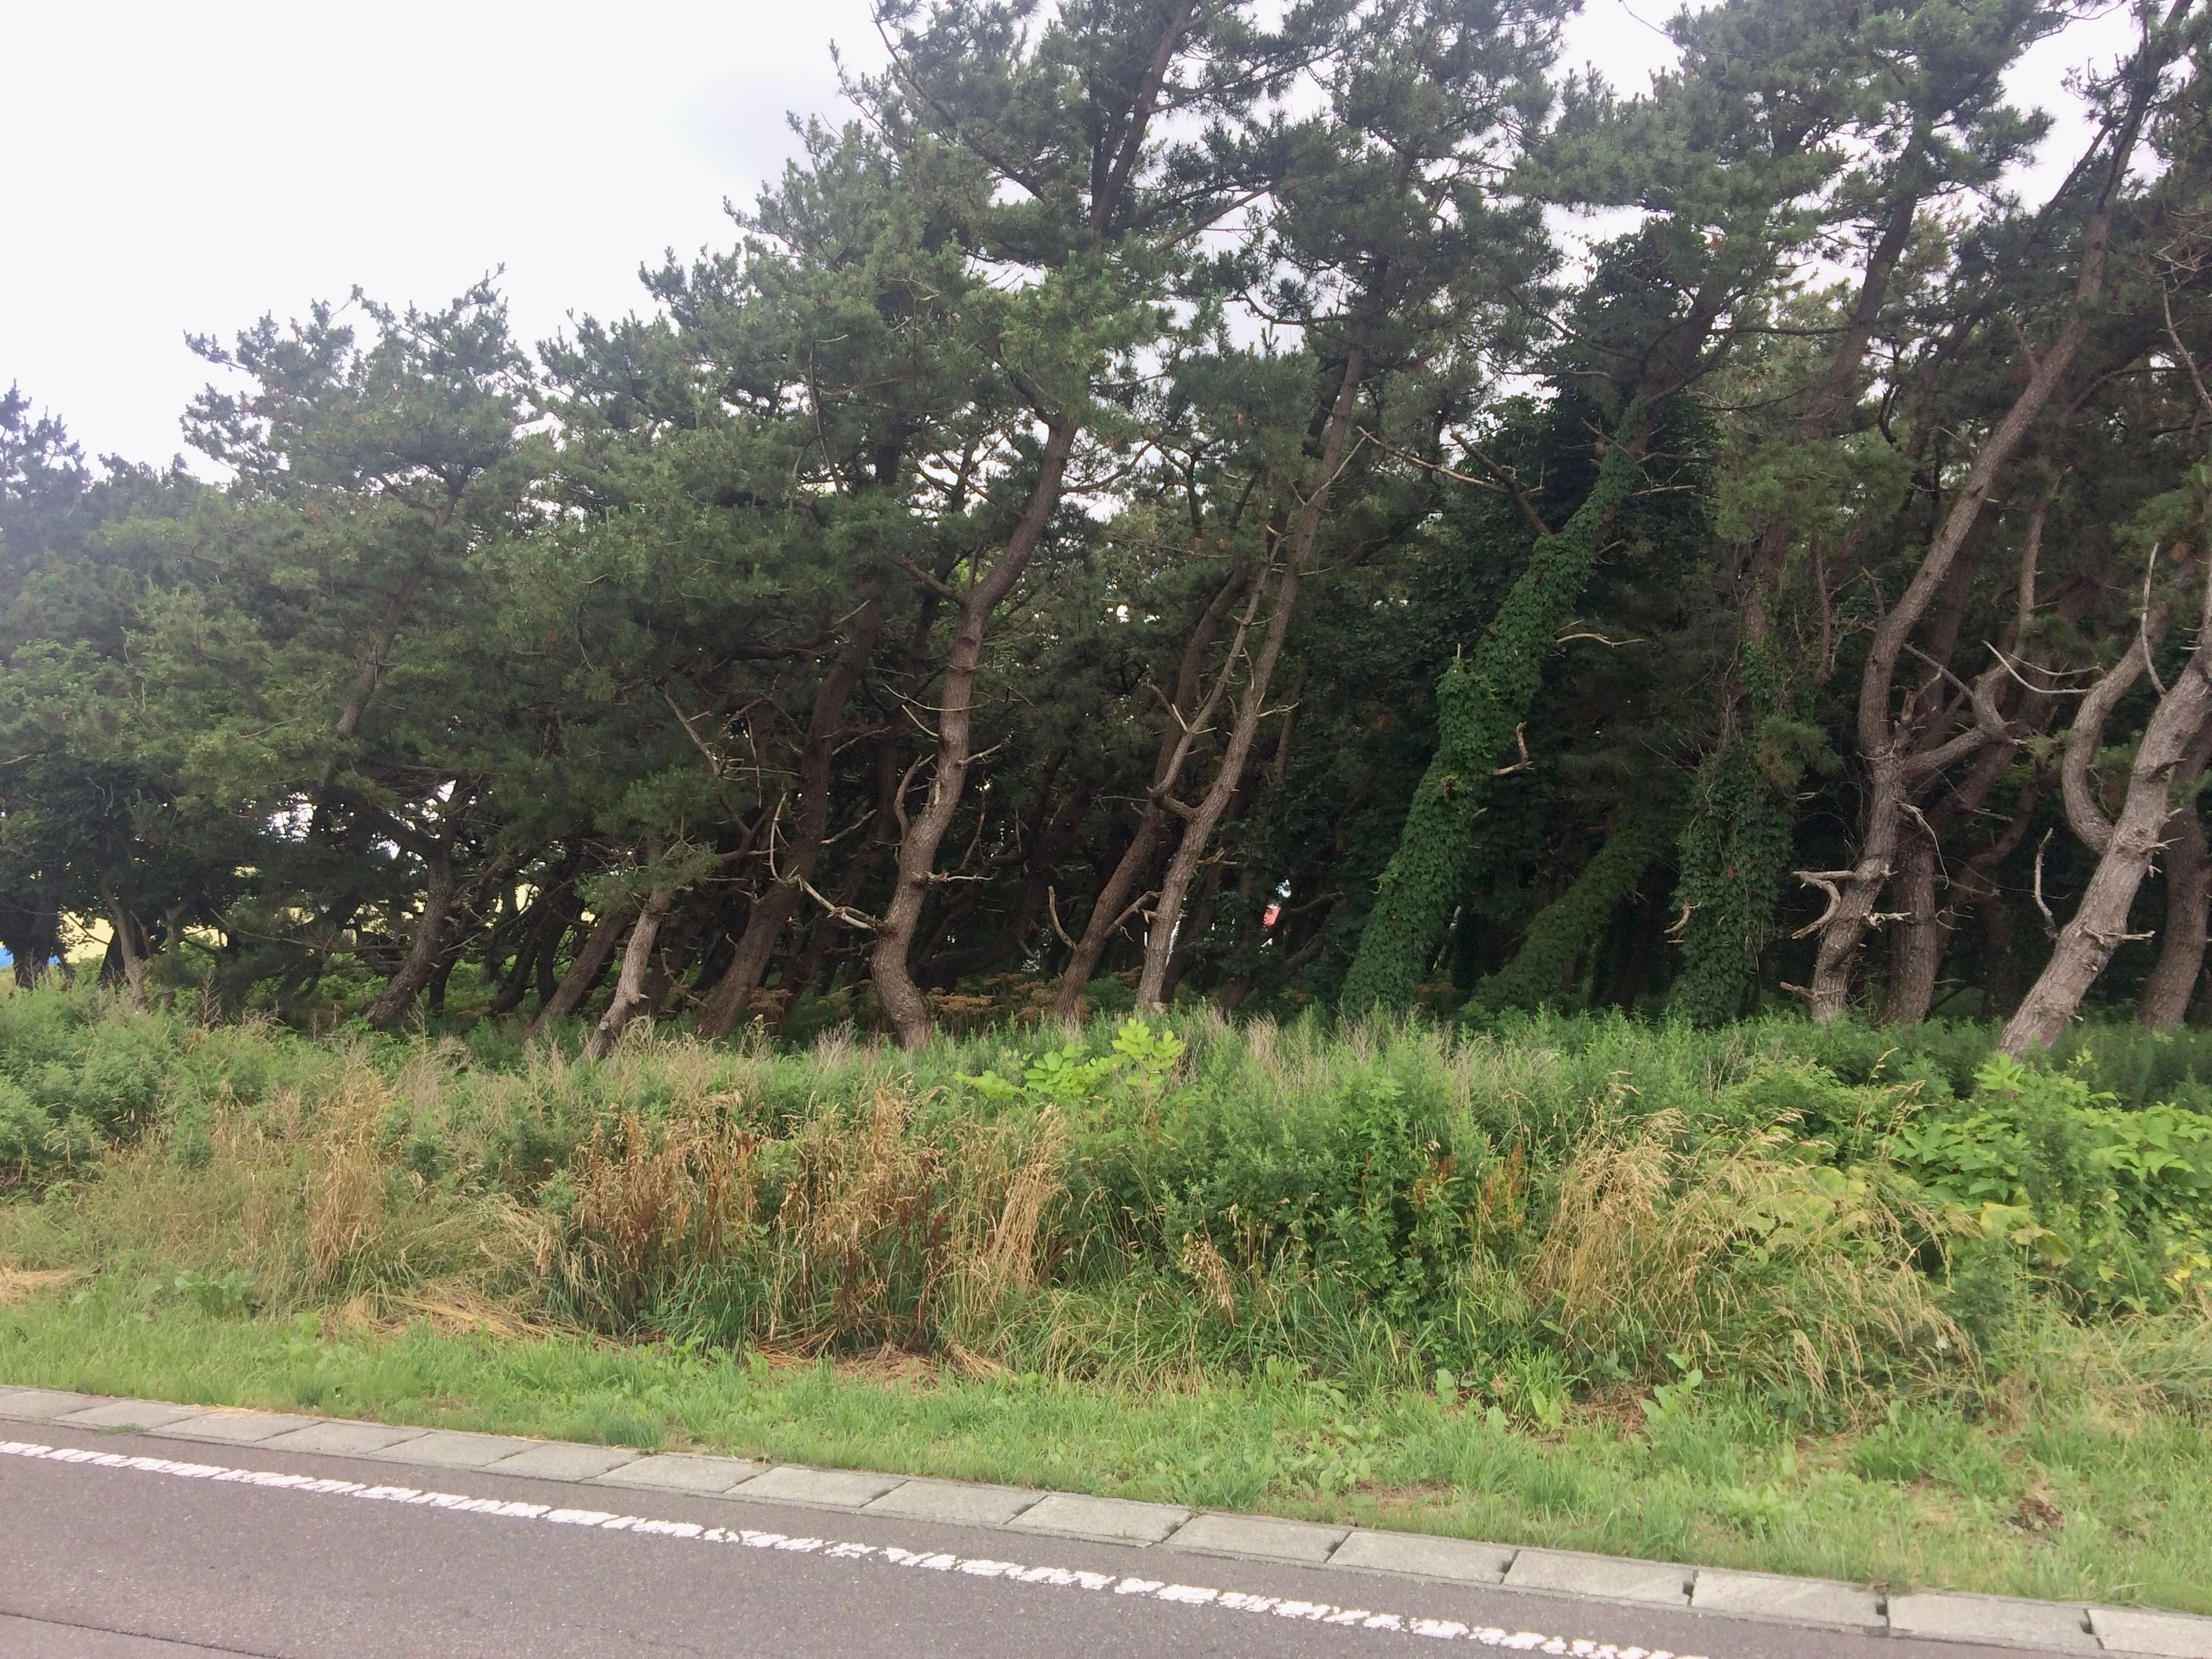 Trees by a road bent by the wind.